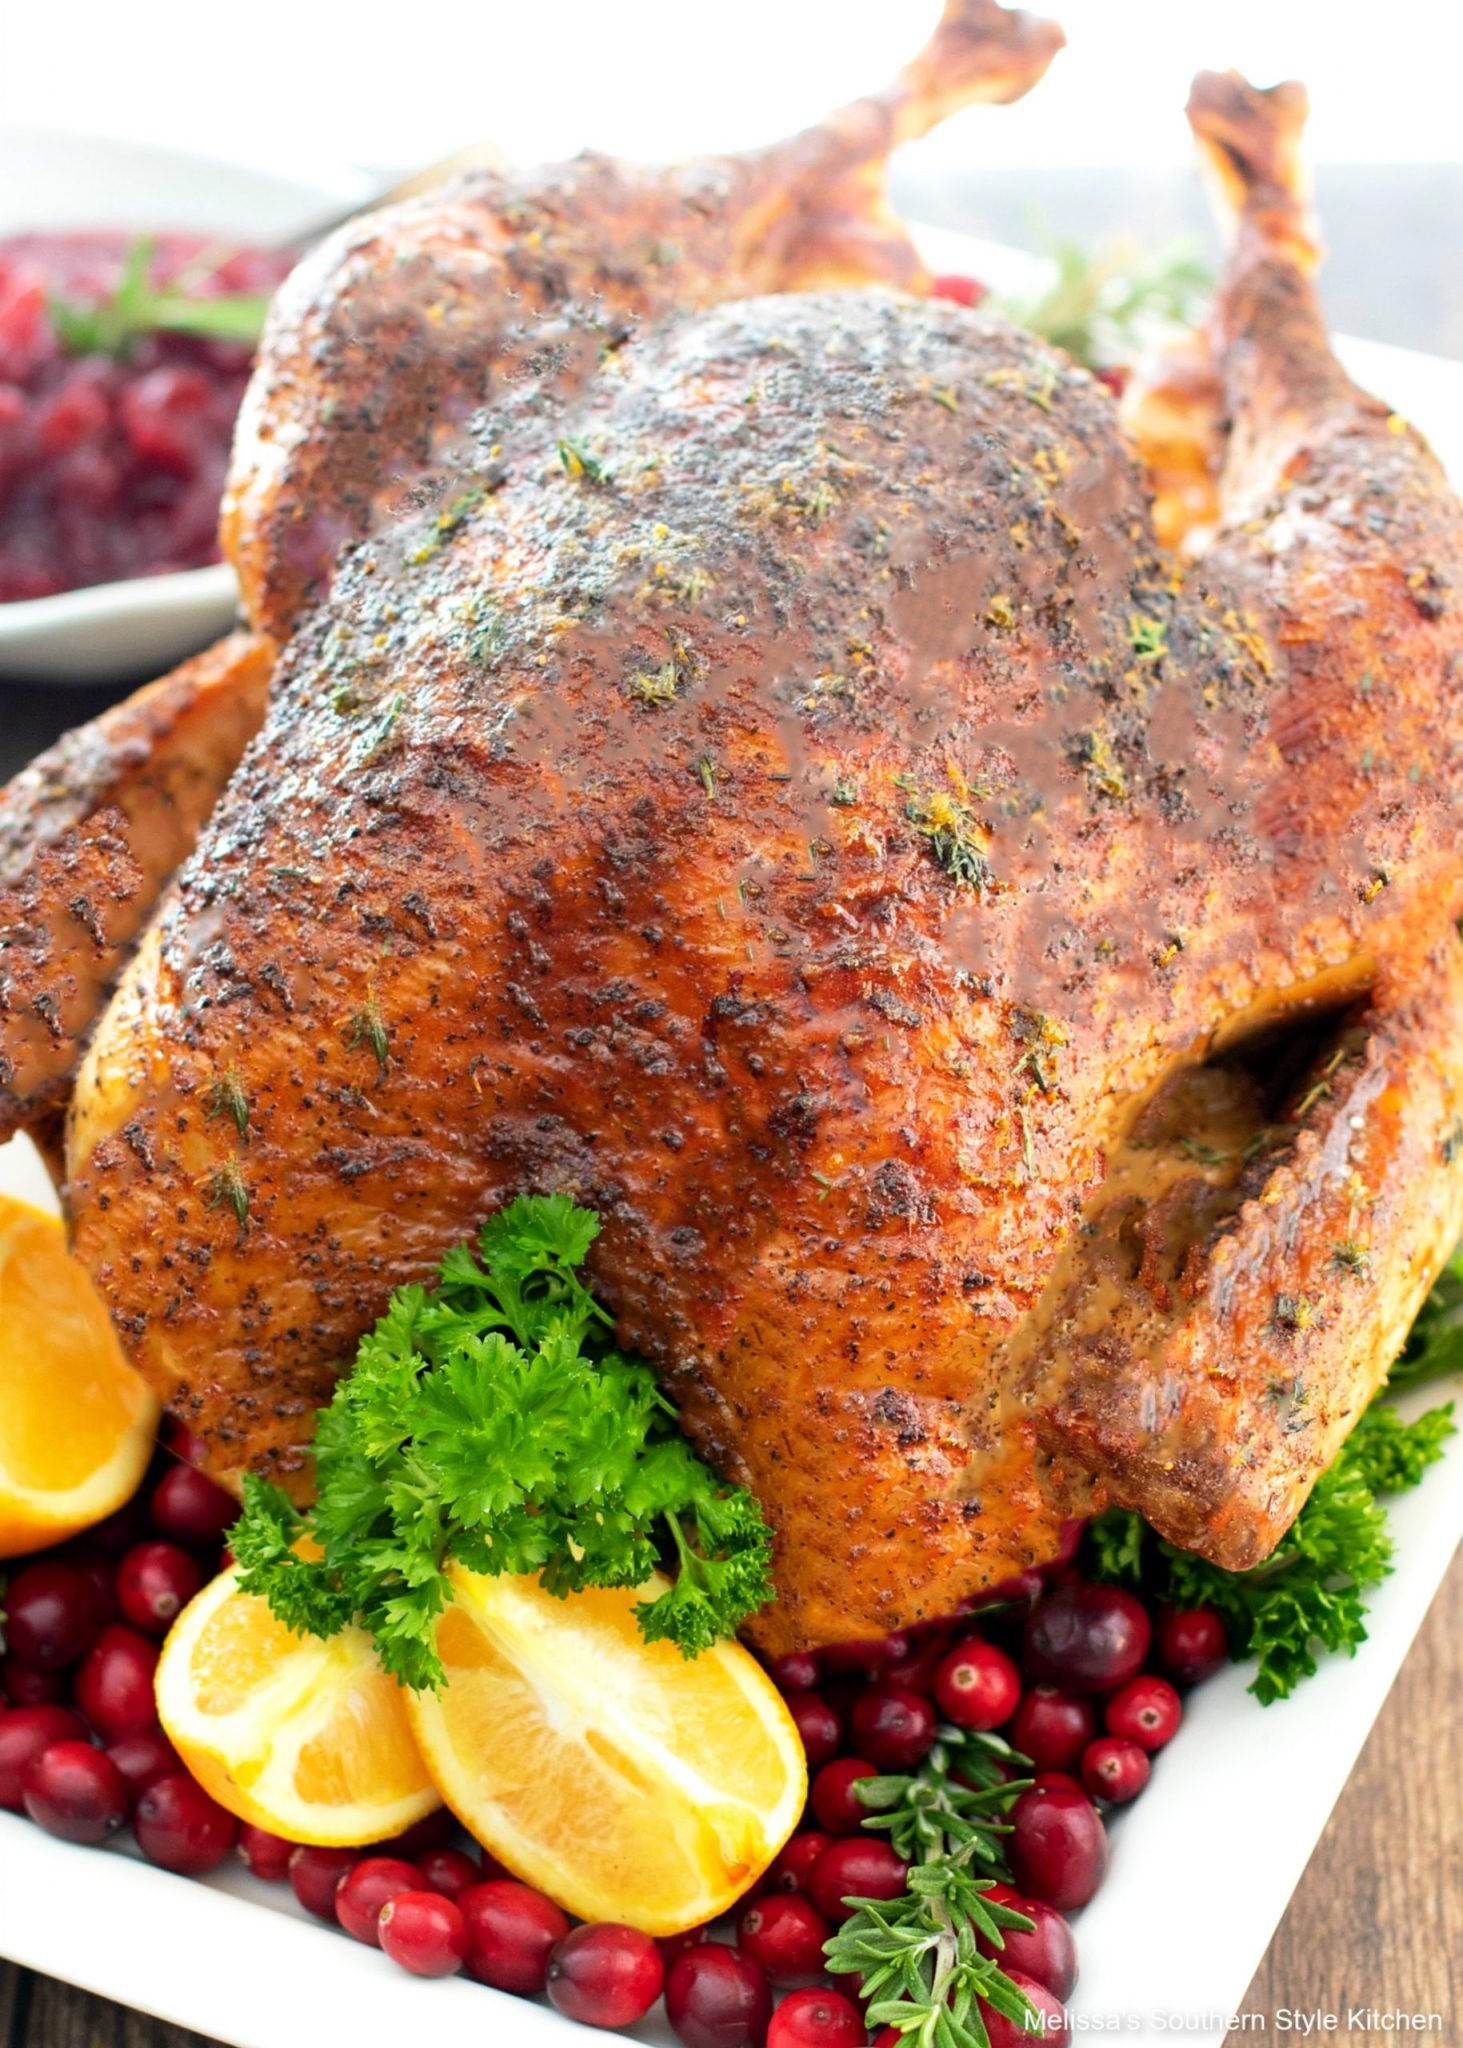 Can You Eat Oven Roasted Turkey When Pregnant